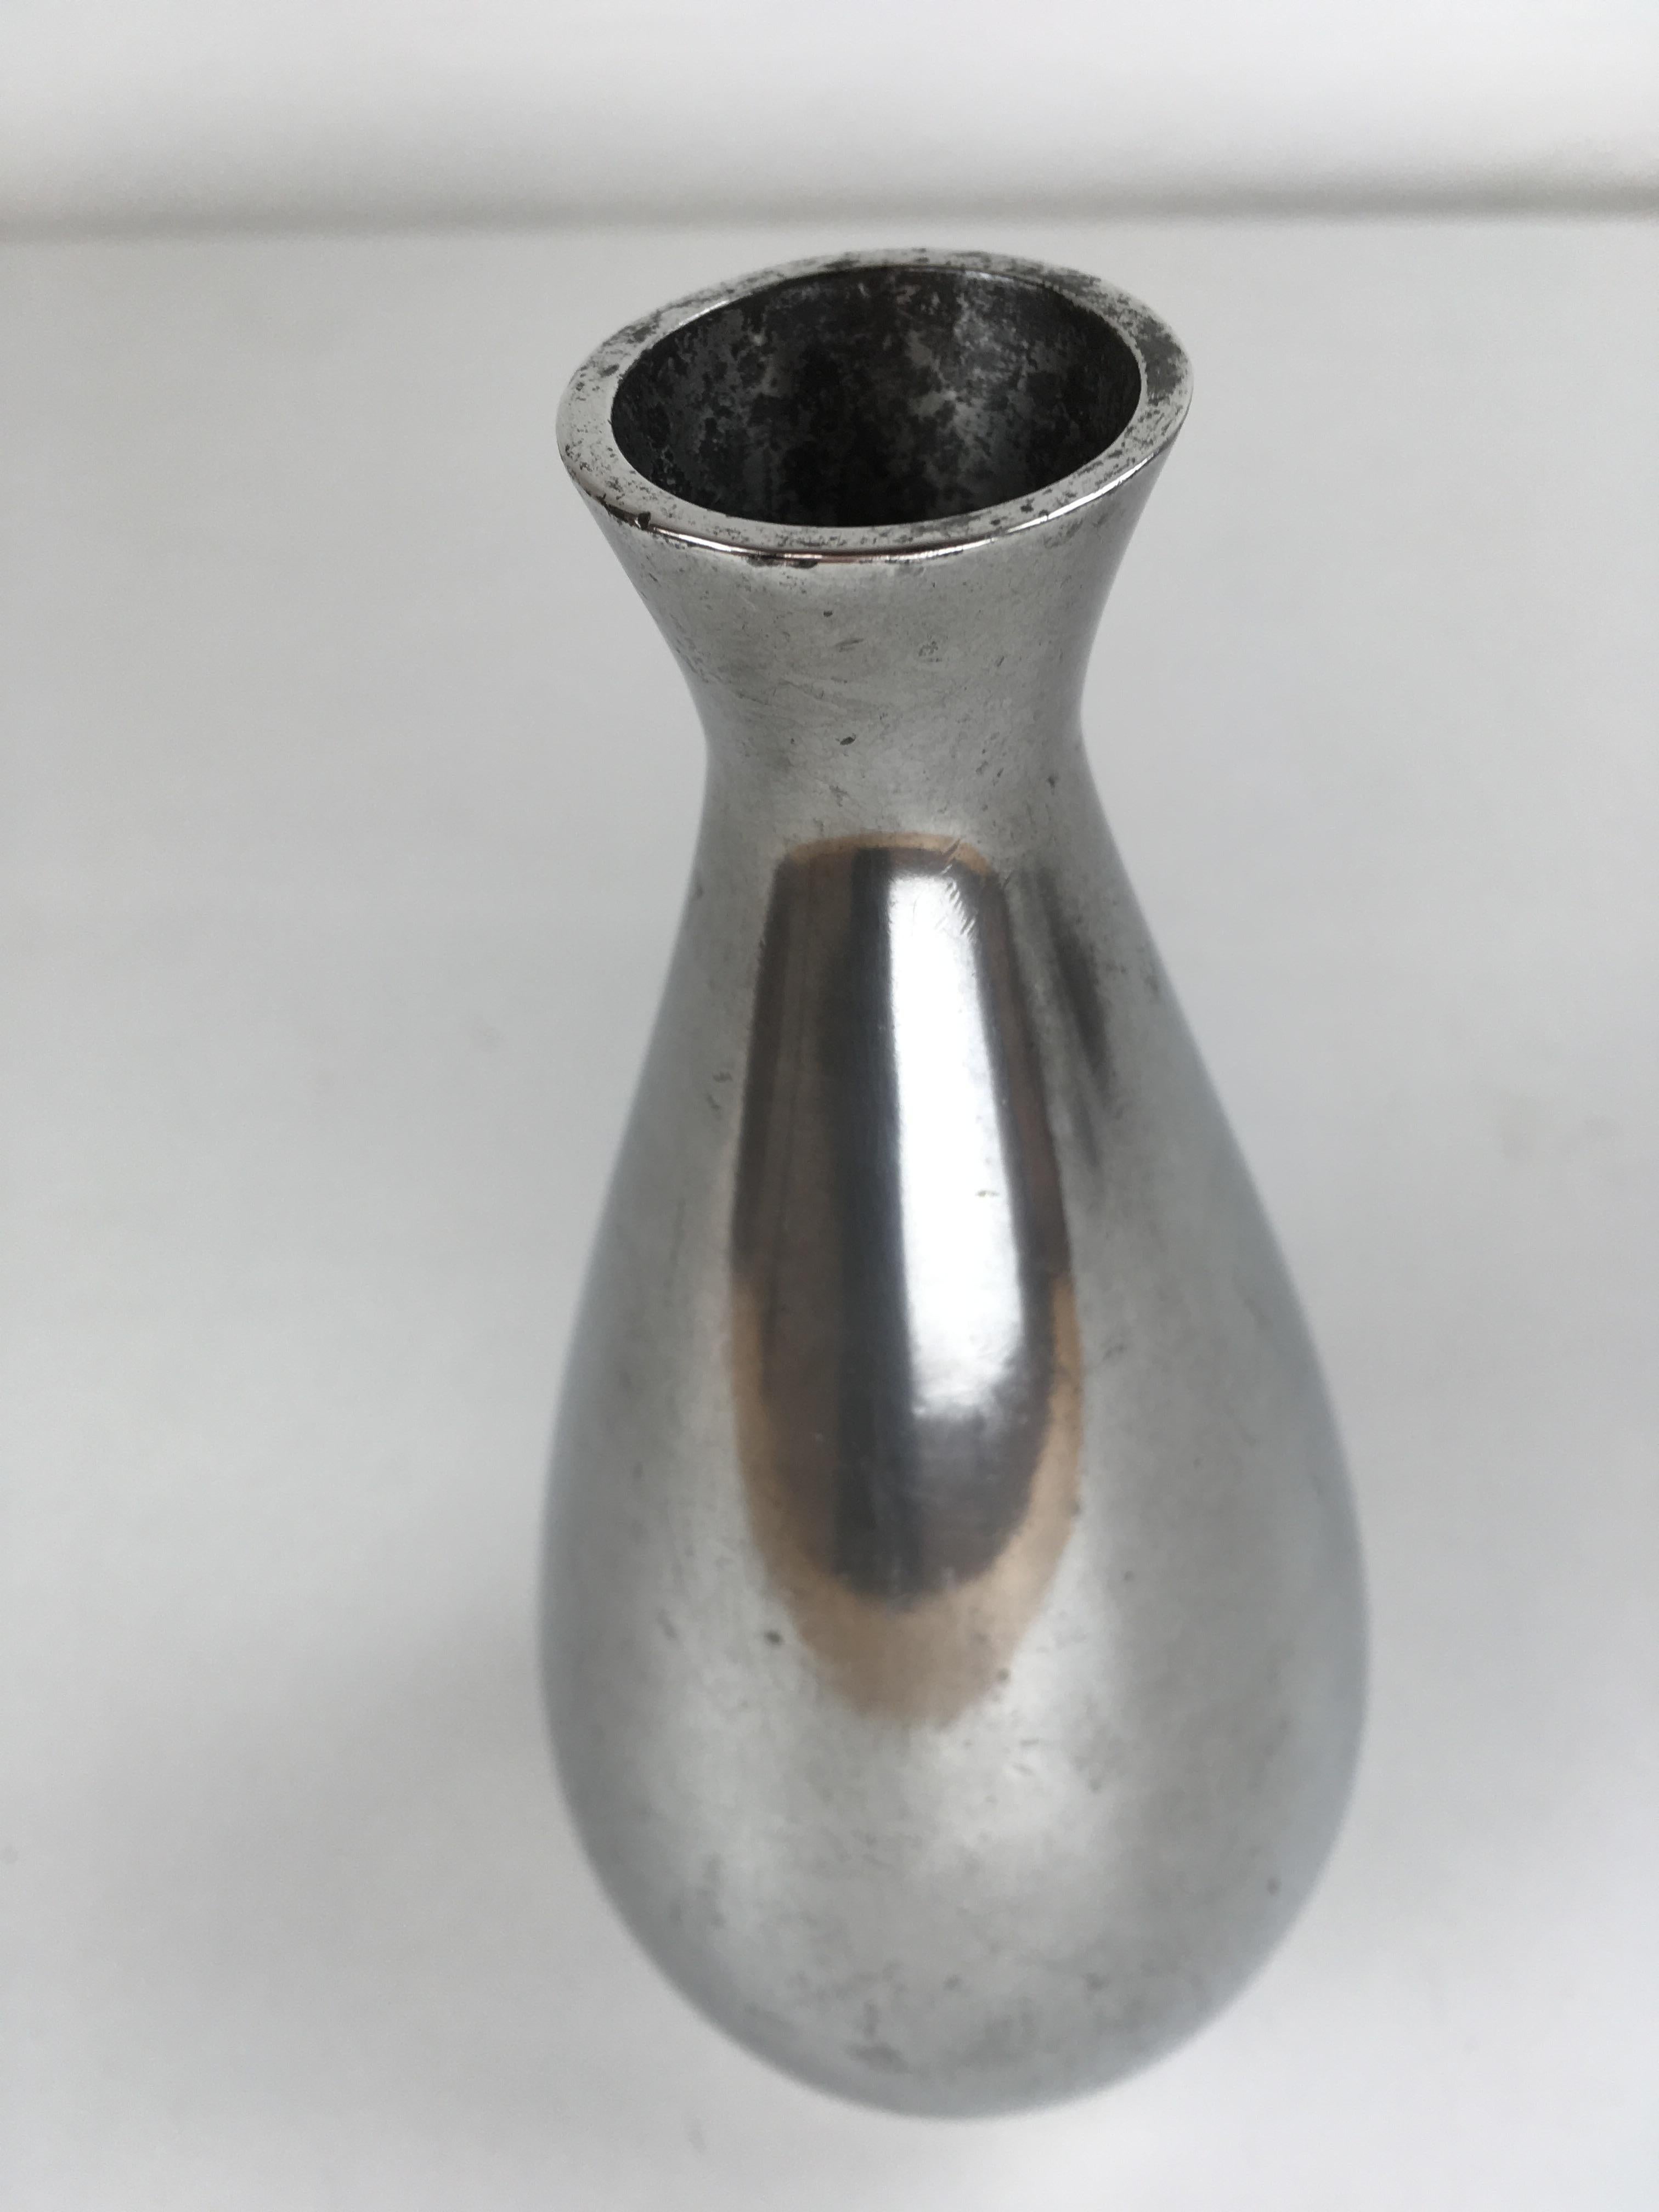 Danish Just Andersen pewter vase produced by Just Andersen A/S in the 1940 - 1950's.

The vase is marked with Just. Andersens triangle mark. 

Just Andersen 1884-1943 was born in Godhavn on the Disko island, which is located on the west side of